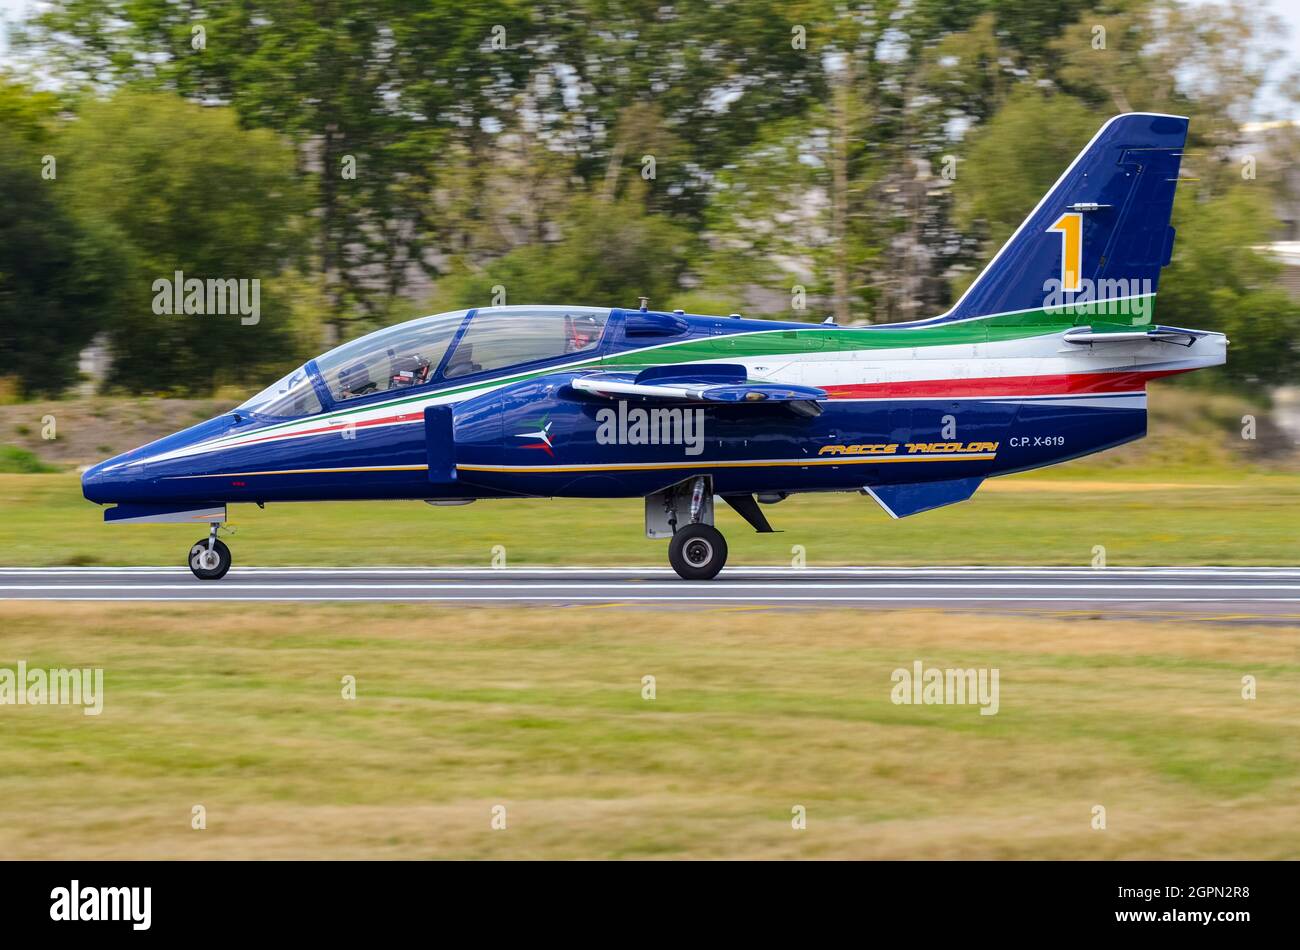 Aermacchi M 345 advanced military jet trainer plane serial CPX619 in Frecce Tricolori display team colours. Italian Air Force jet training airplane Stock Photo